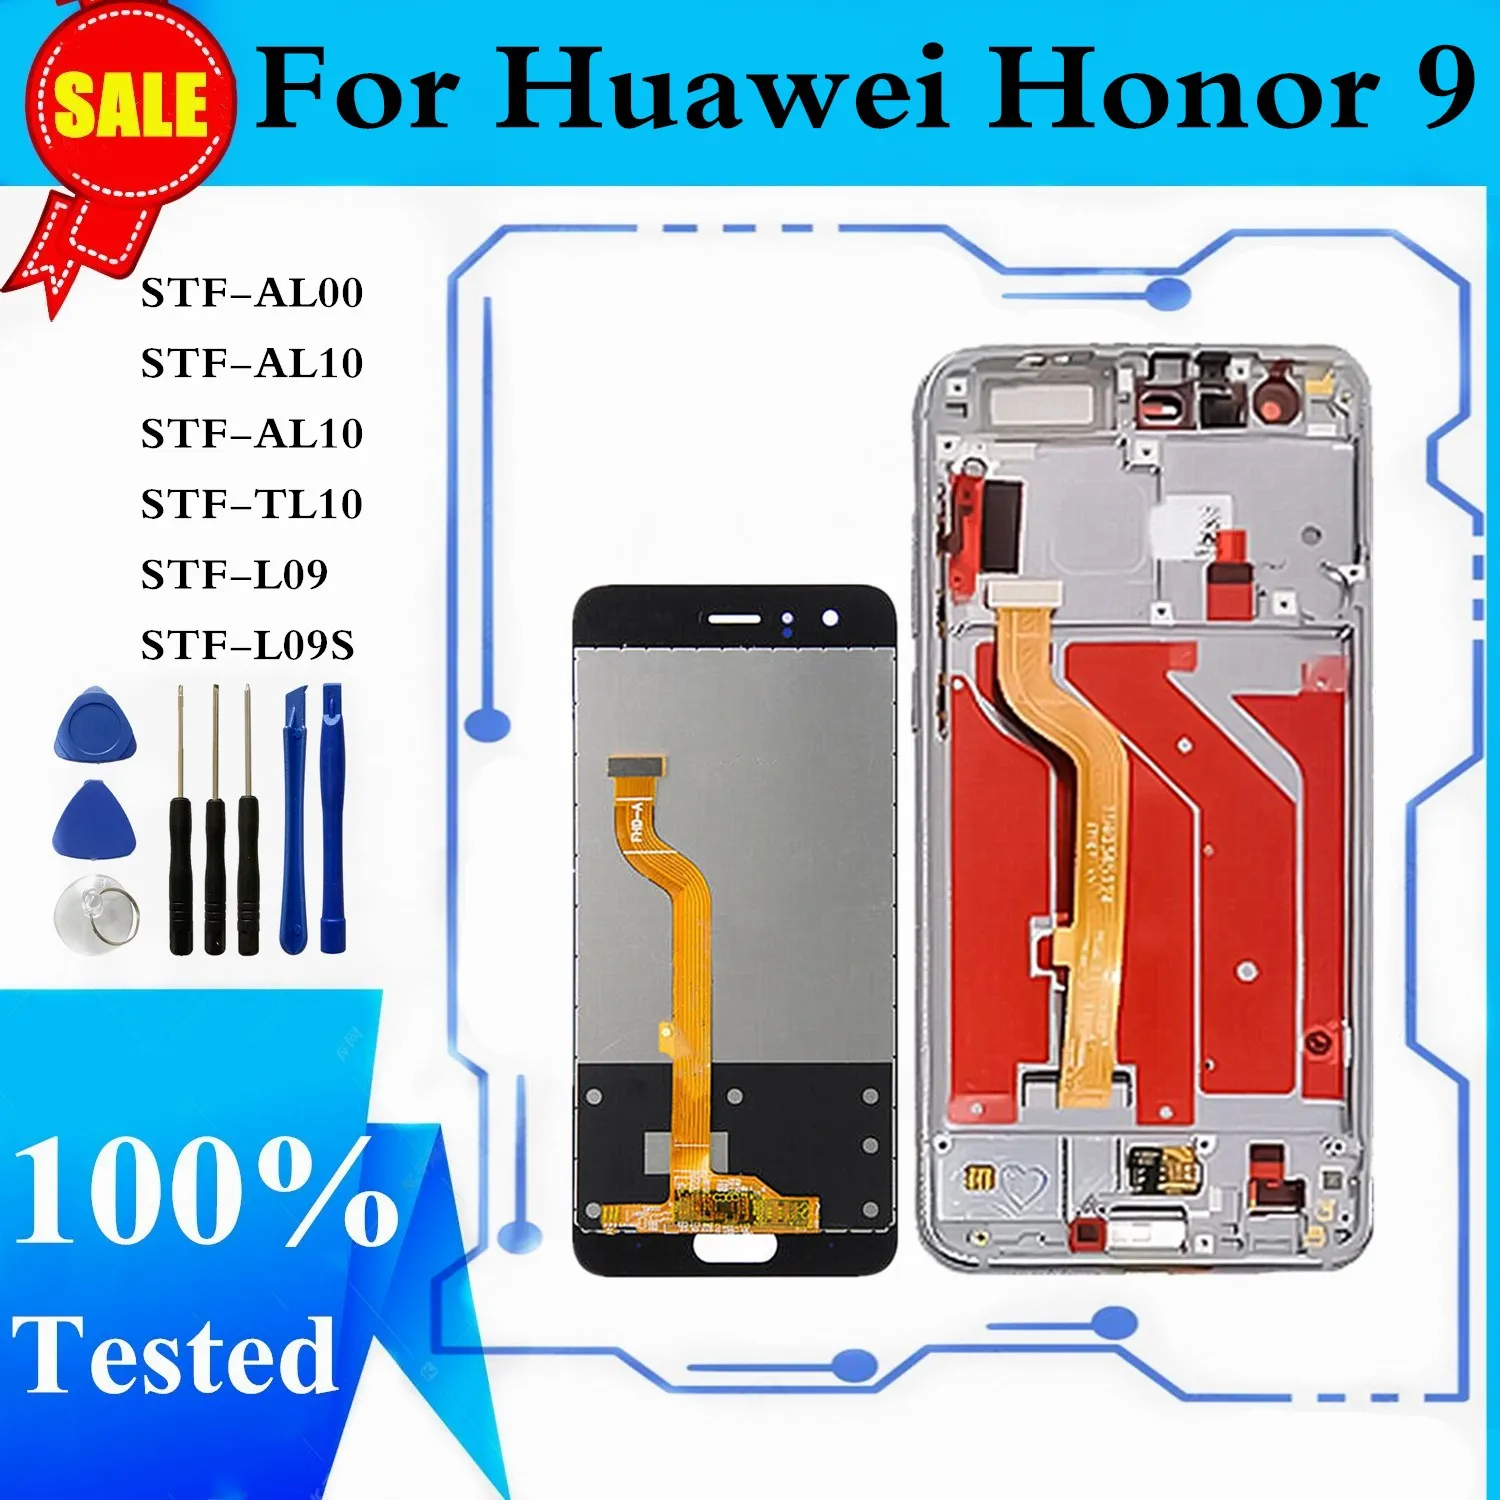 

Original LCD For Huawei Honor 9 STF-L09 STF-AL10 STF-AL00 STF-TL10 LCD Display Touch Screen Digitizer Assembly Replace Part